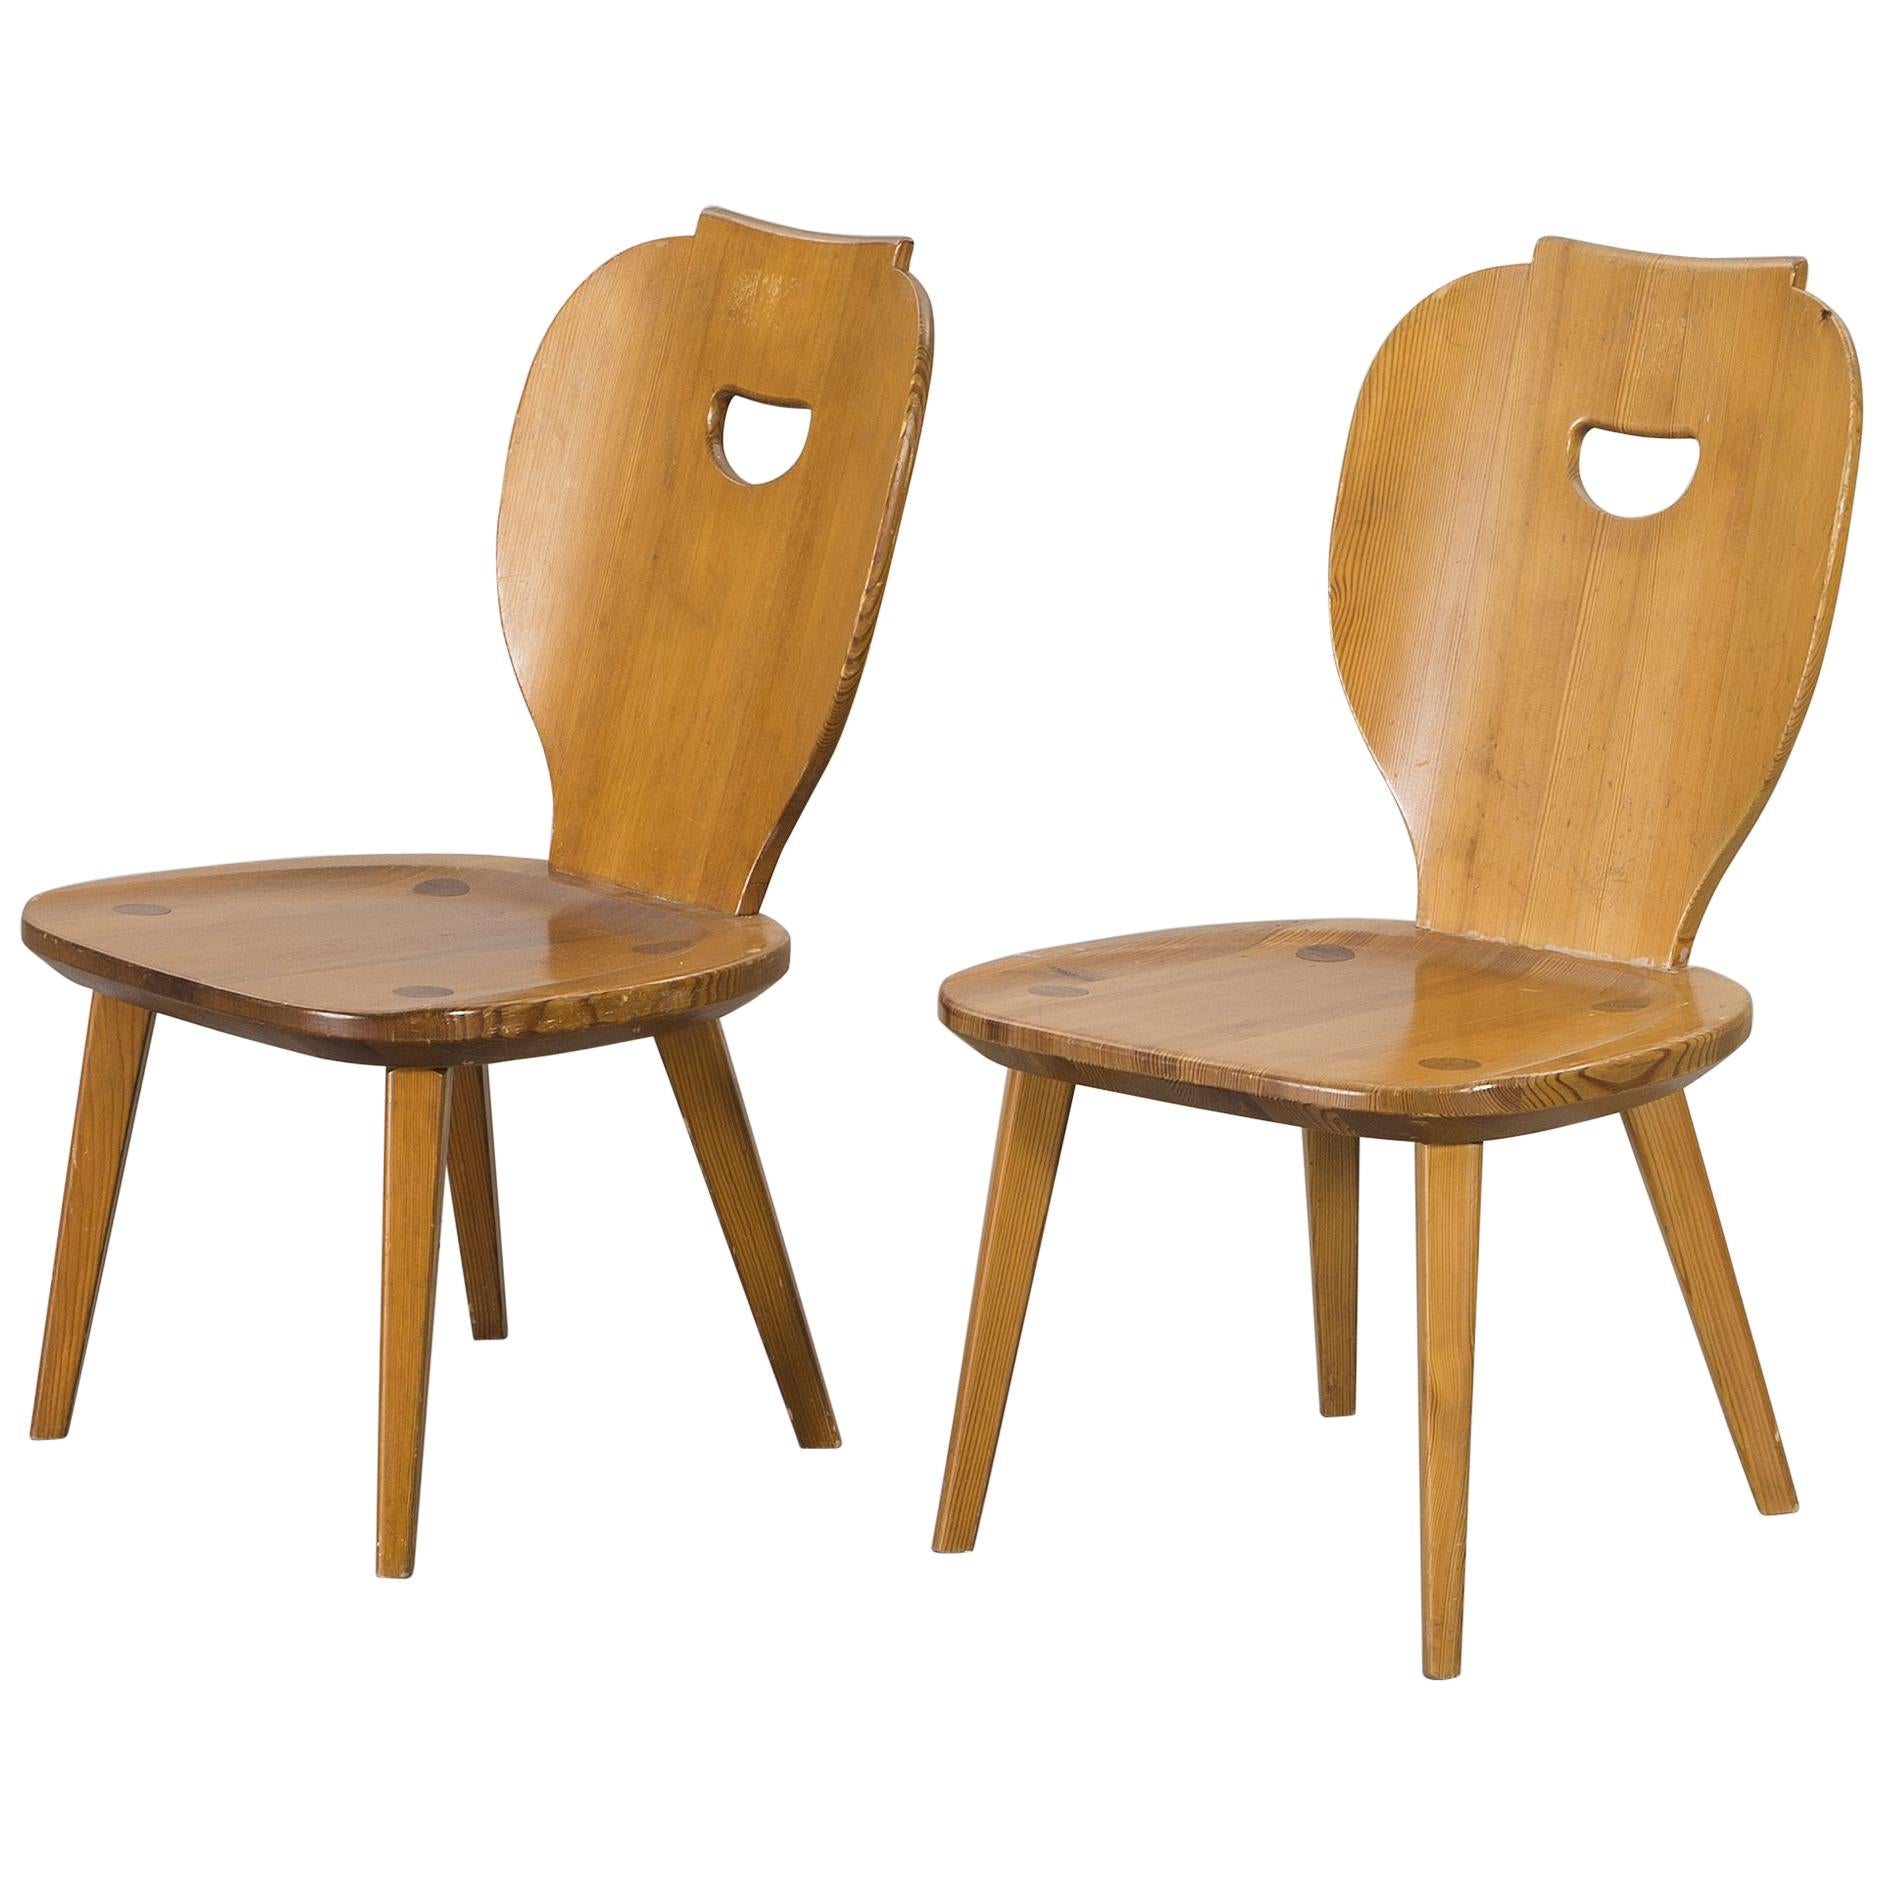 2 Pine Chairs, Carl Malmsten, Sweden, 1953 For Sale